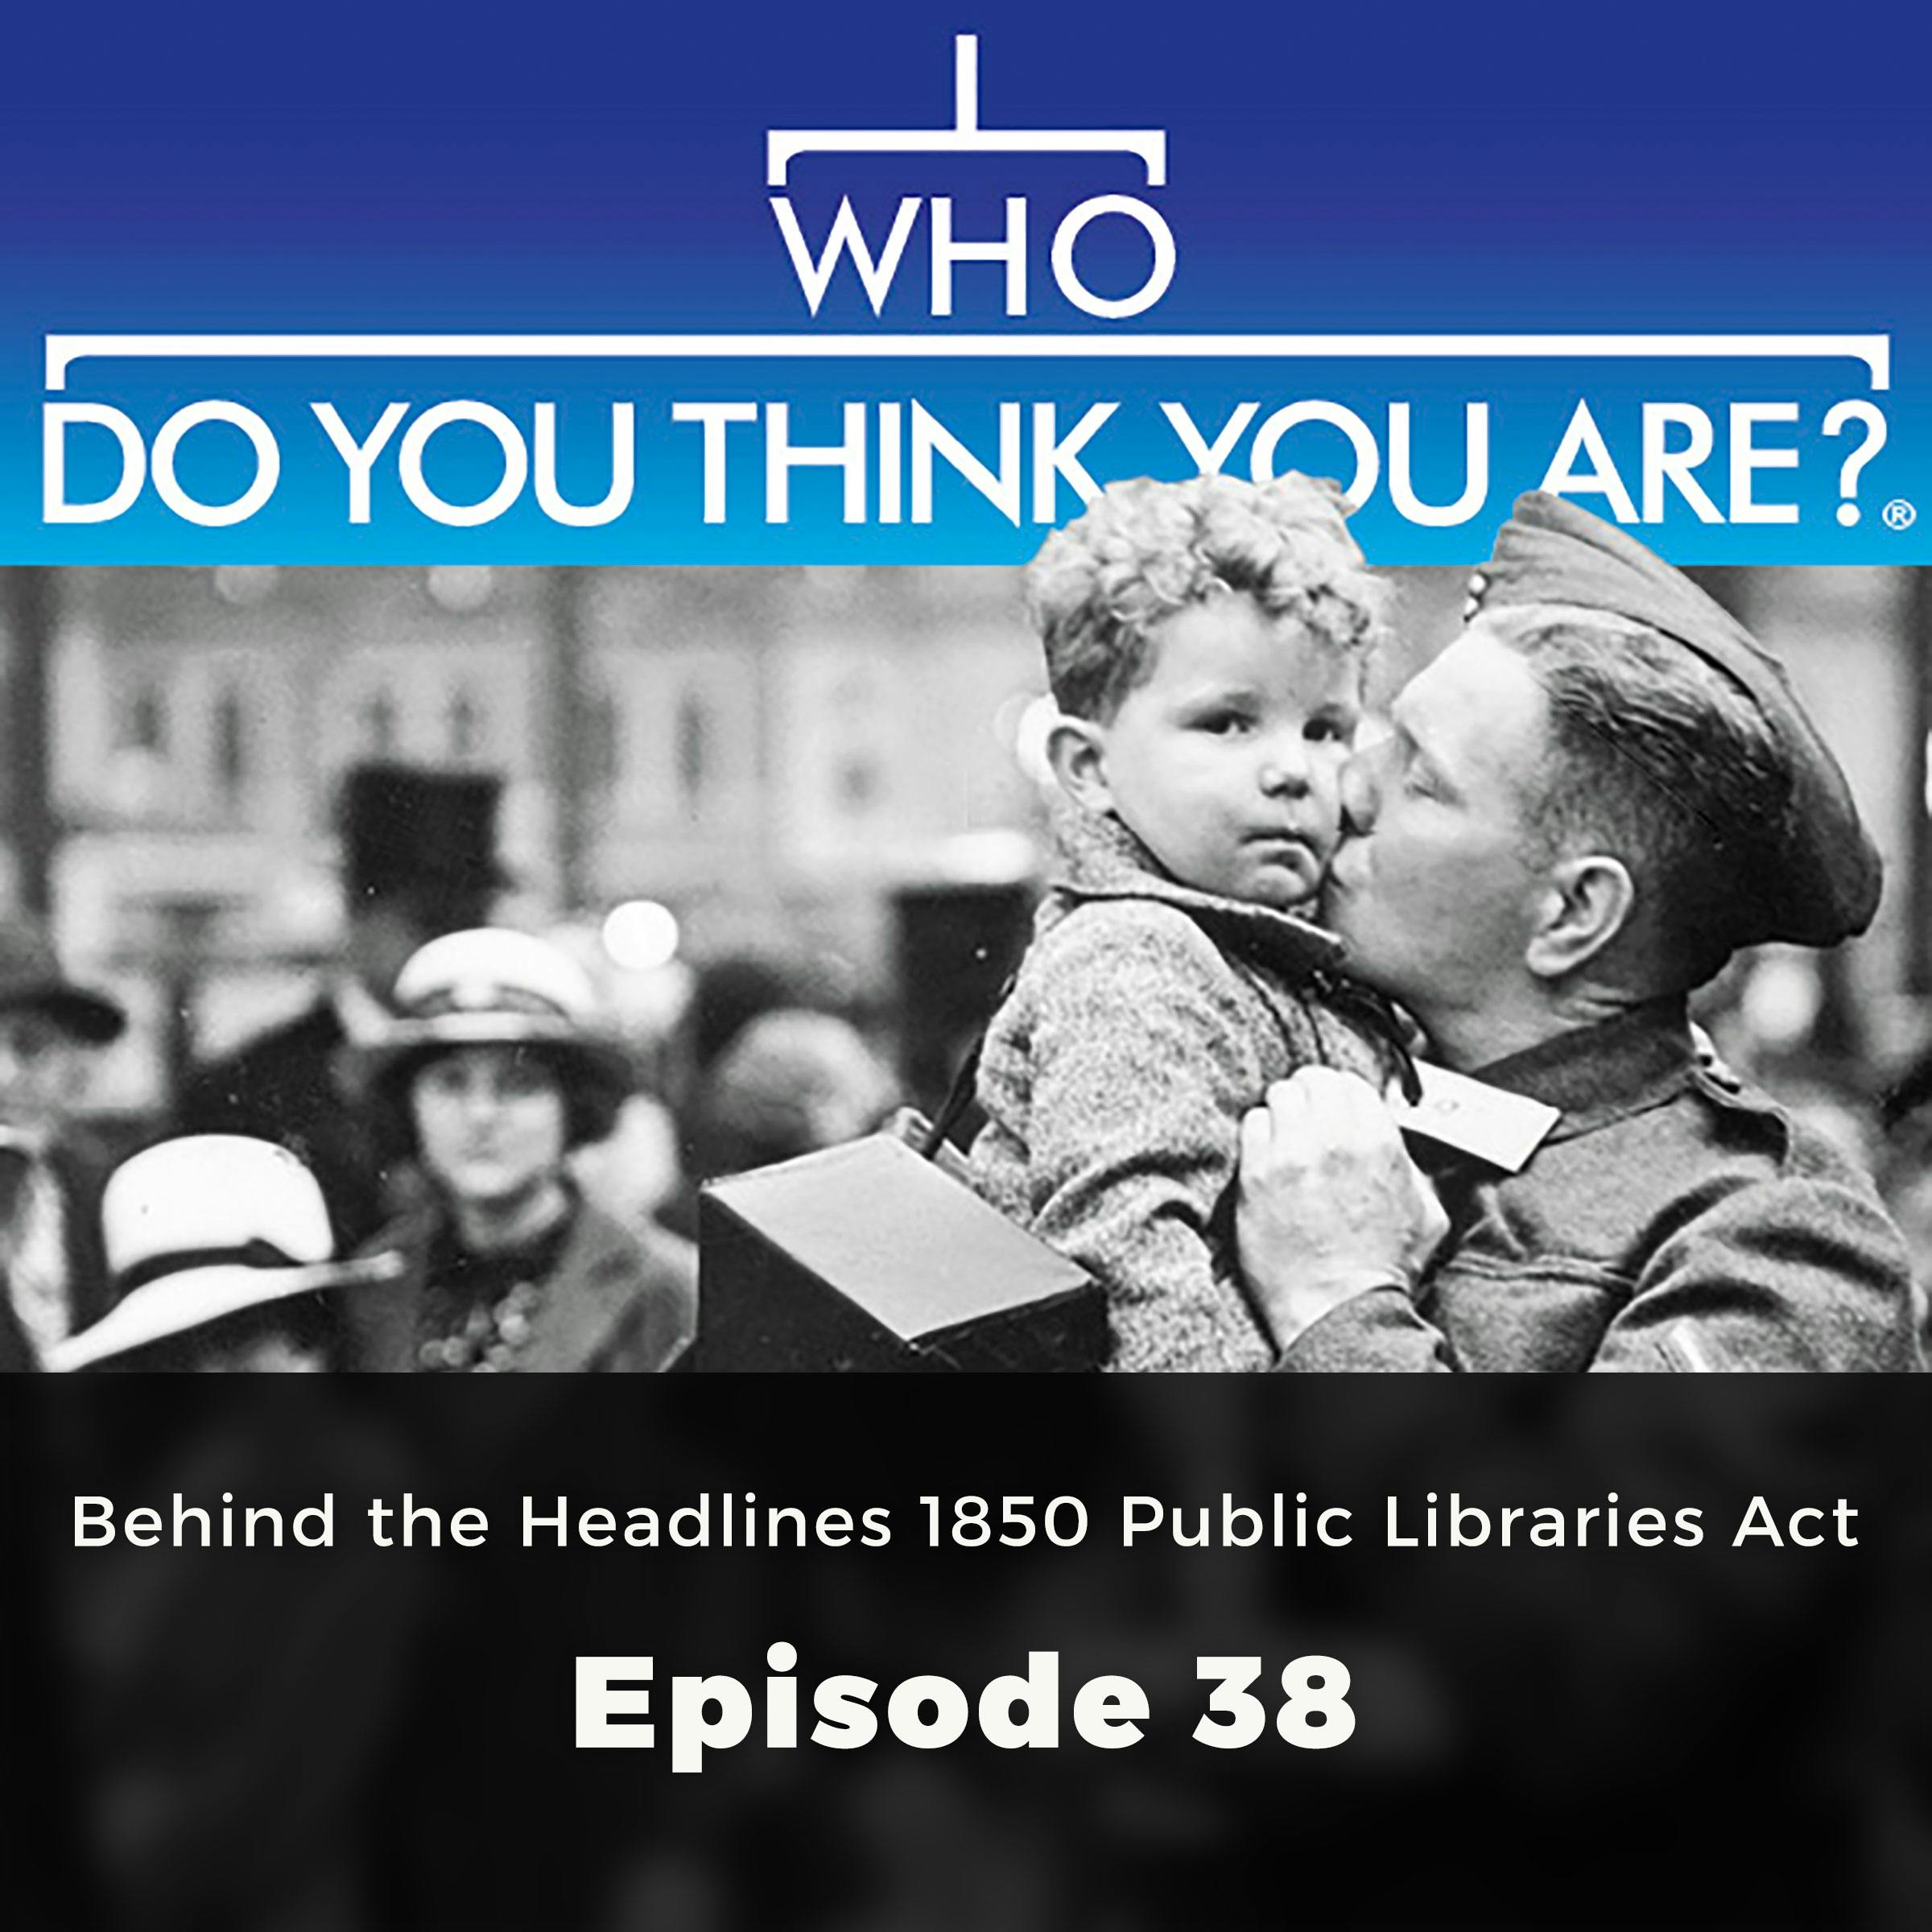 Who Do You Think You Are? Behind the Headlines 1850 Public Libraries Act: Episode 38 - undefined